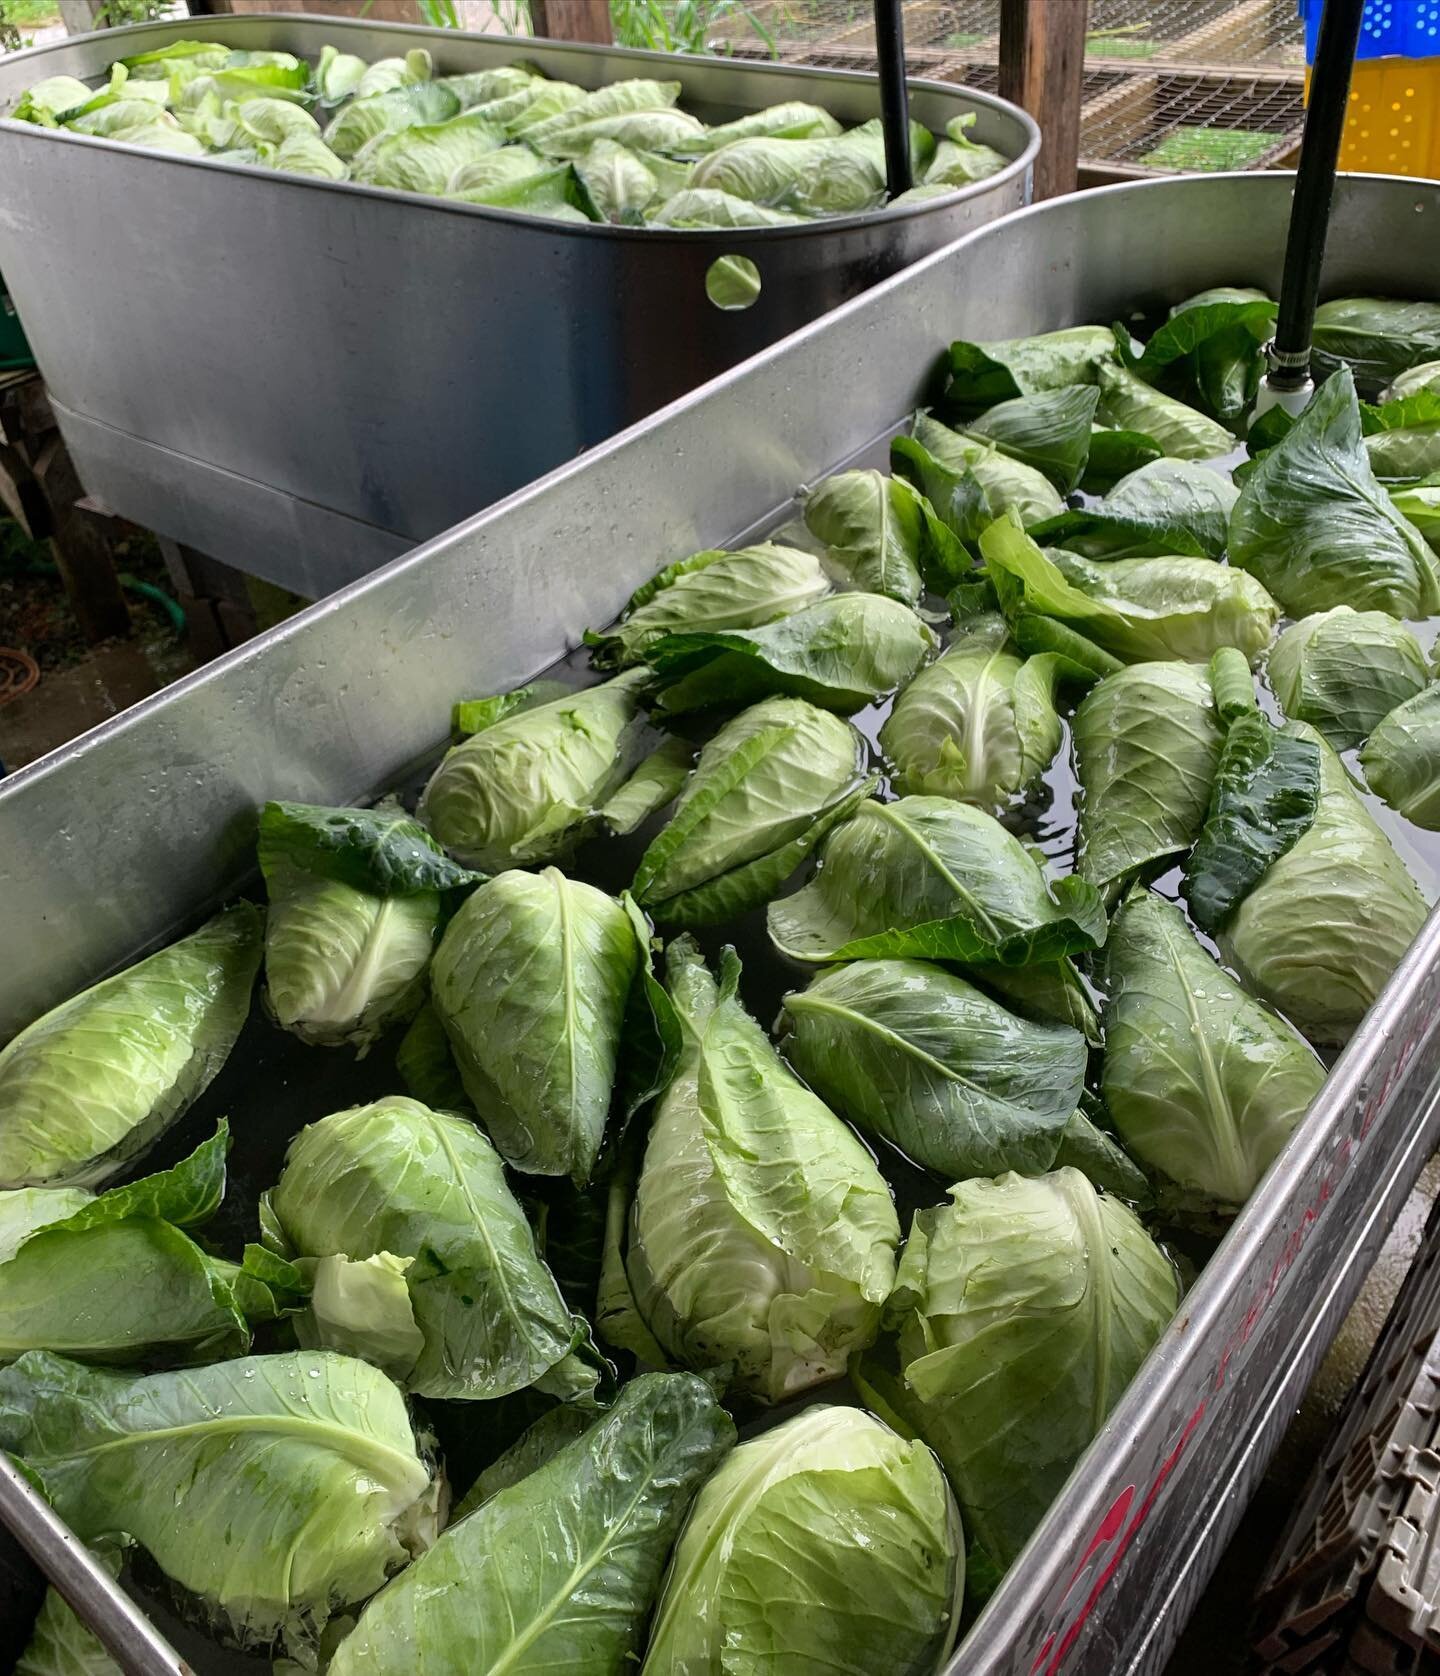 Check out the new cabbage variety we have in our CSA cooler this week! This pointed cabbage variety, is called Caraflex. It&rsquo;s also known as sweetheart cabbage or hipsi cabbage. This cabbage is sweet, bright green, great for fresh eating, or for